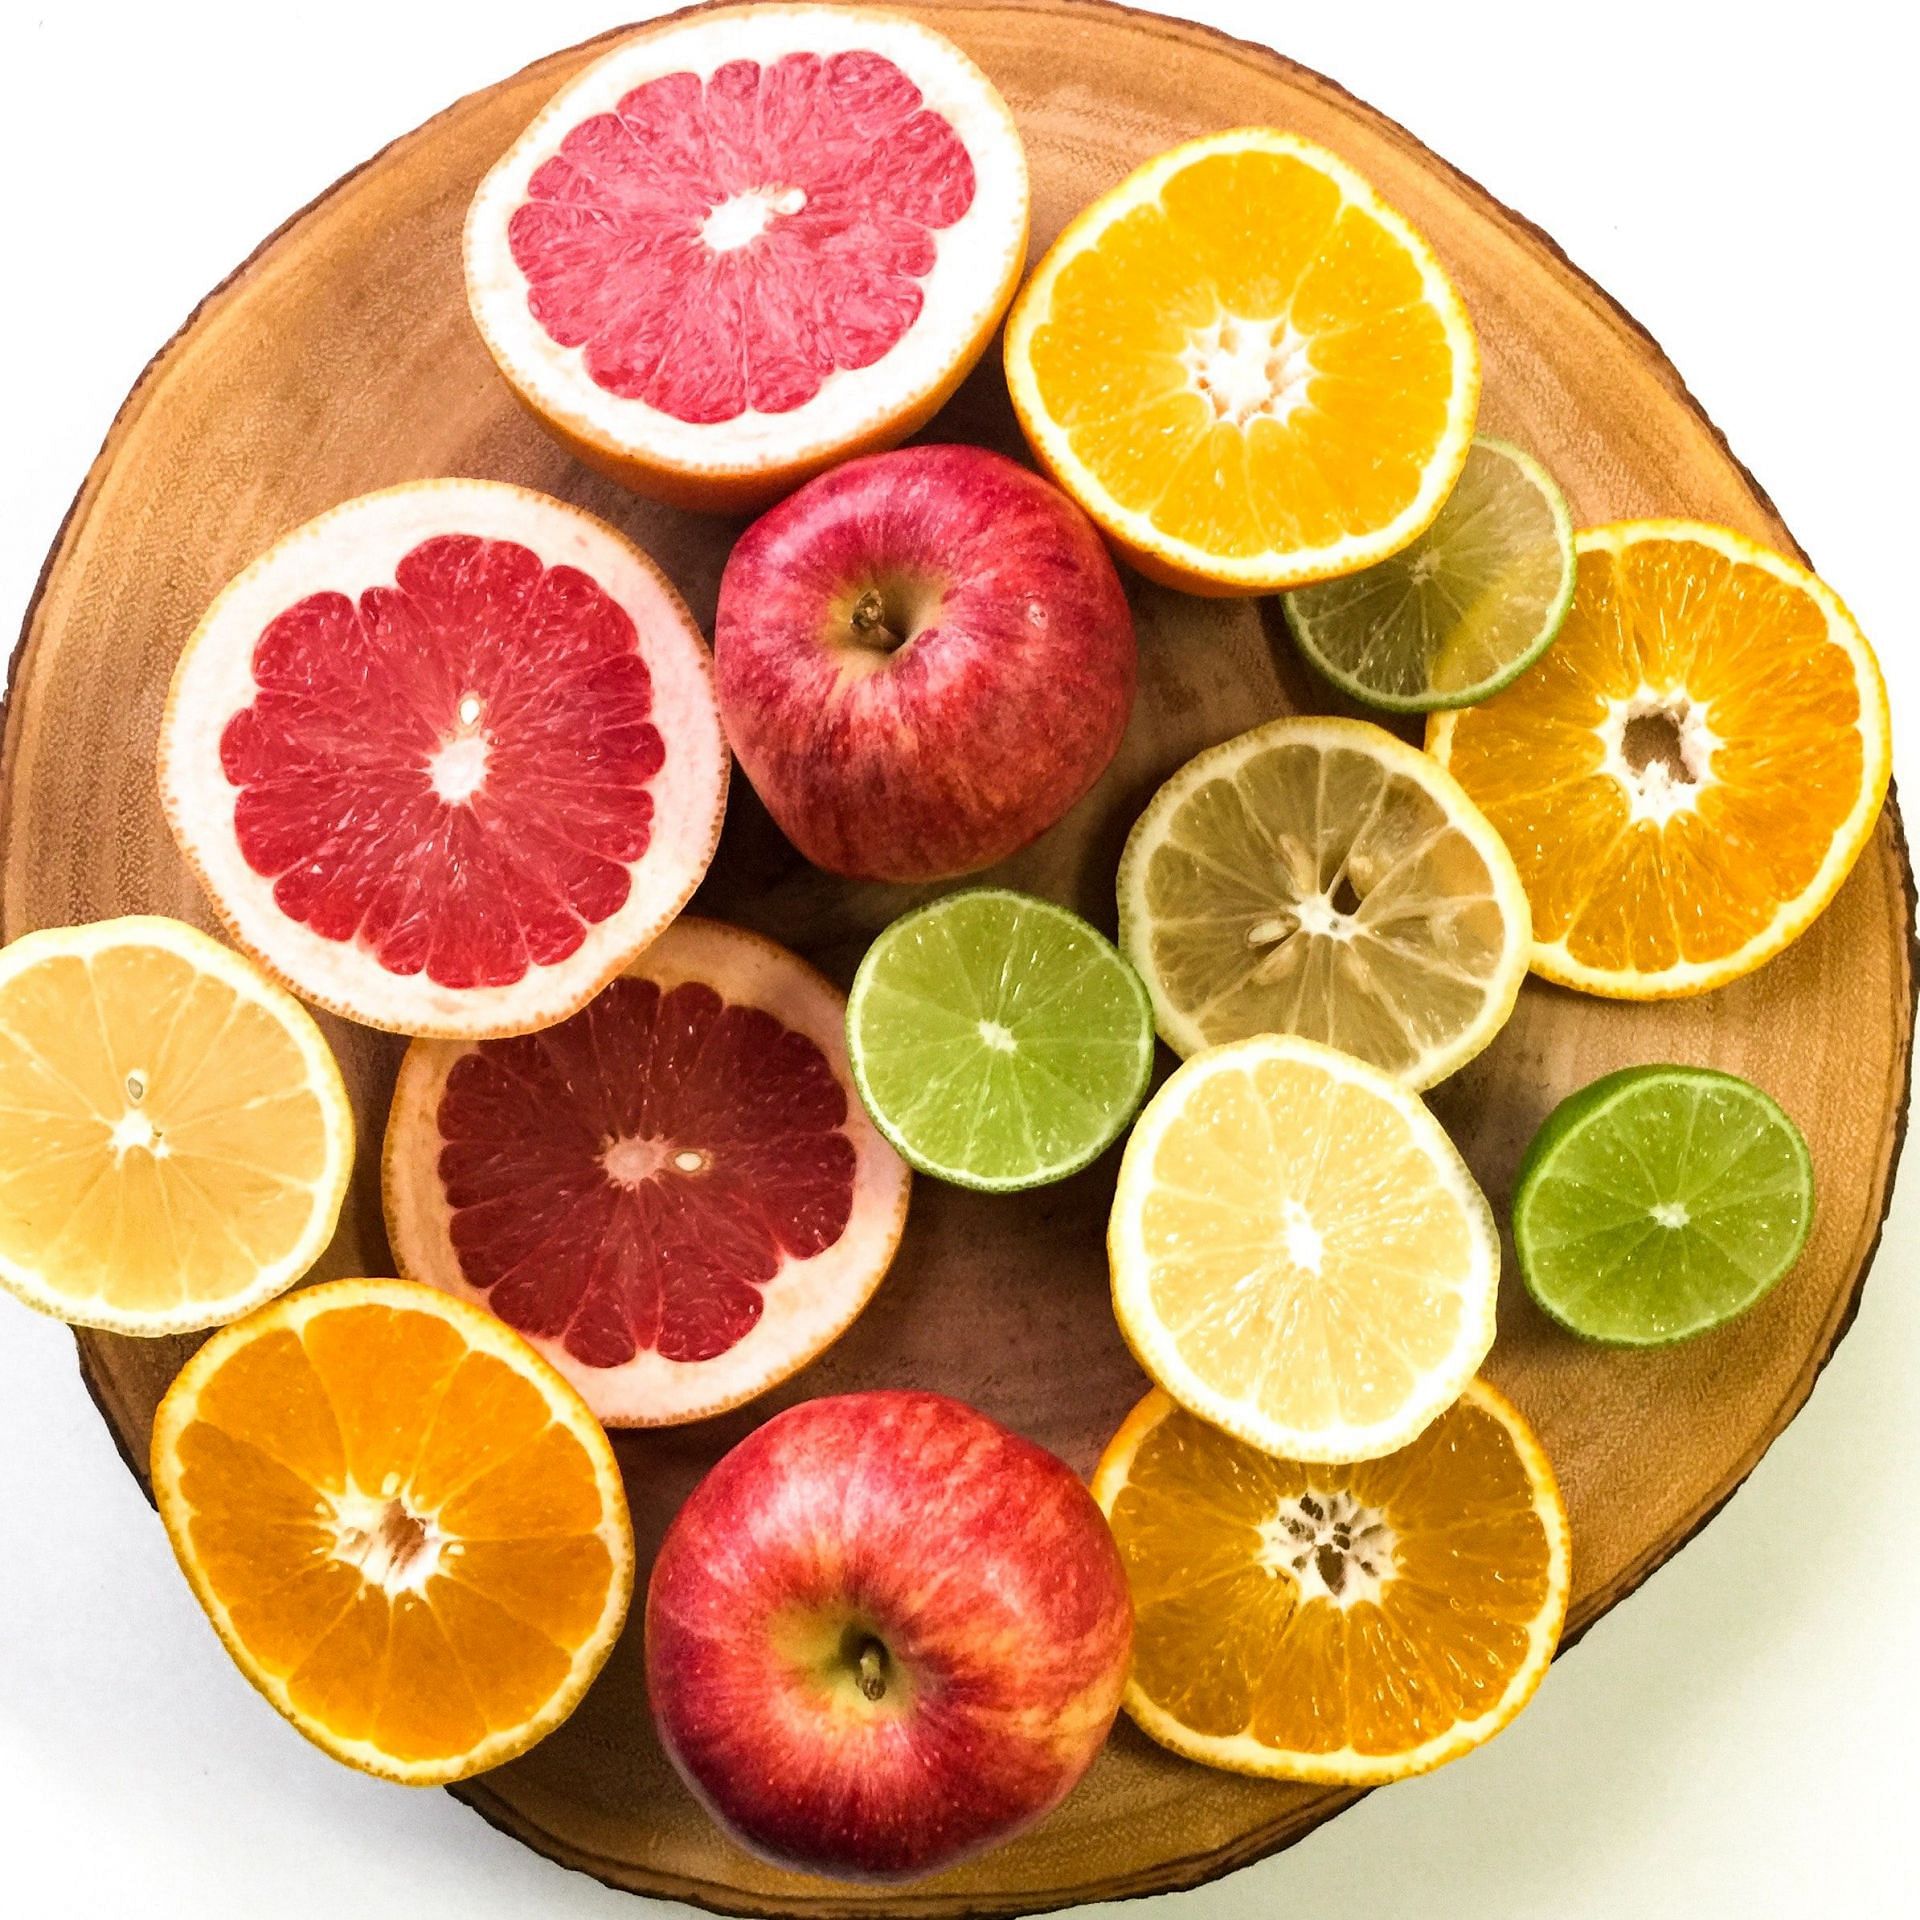 Eating citrus fruits can boost collagen production in the body (Image via Pexels)